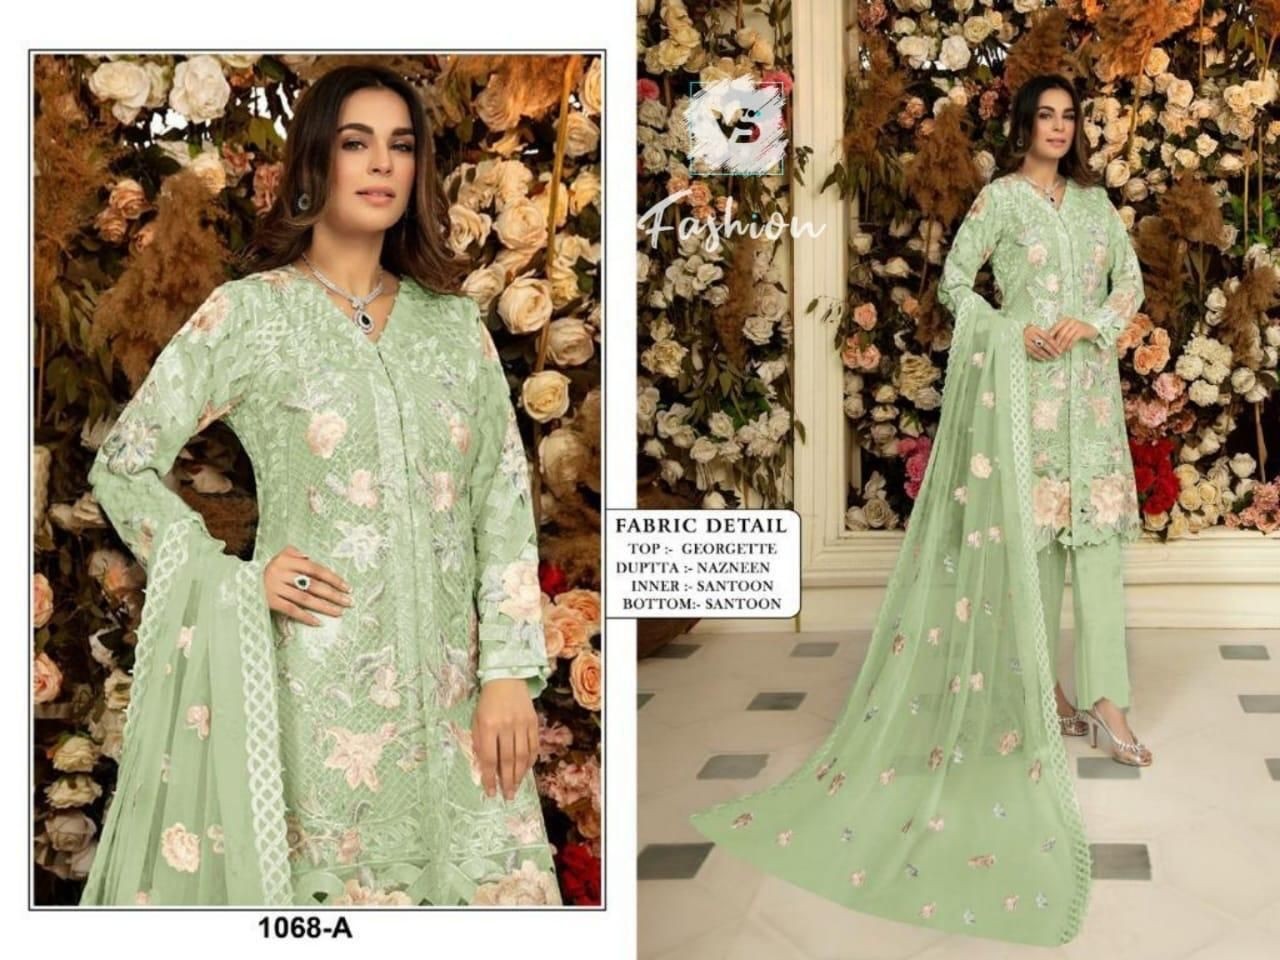 VS FASHION 1068 A PAKISTANI SUITS IN INDIA